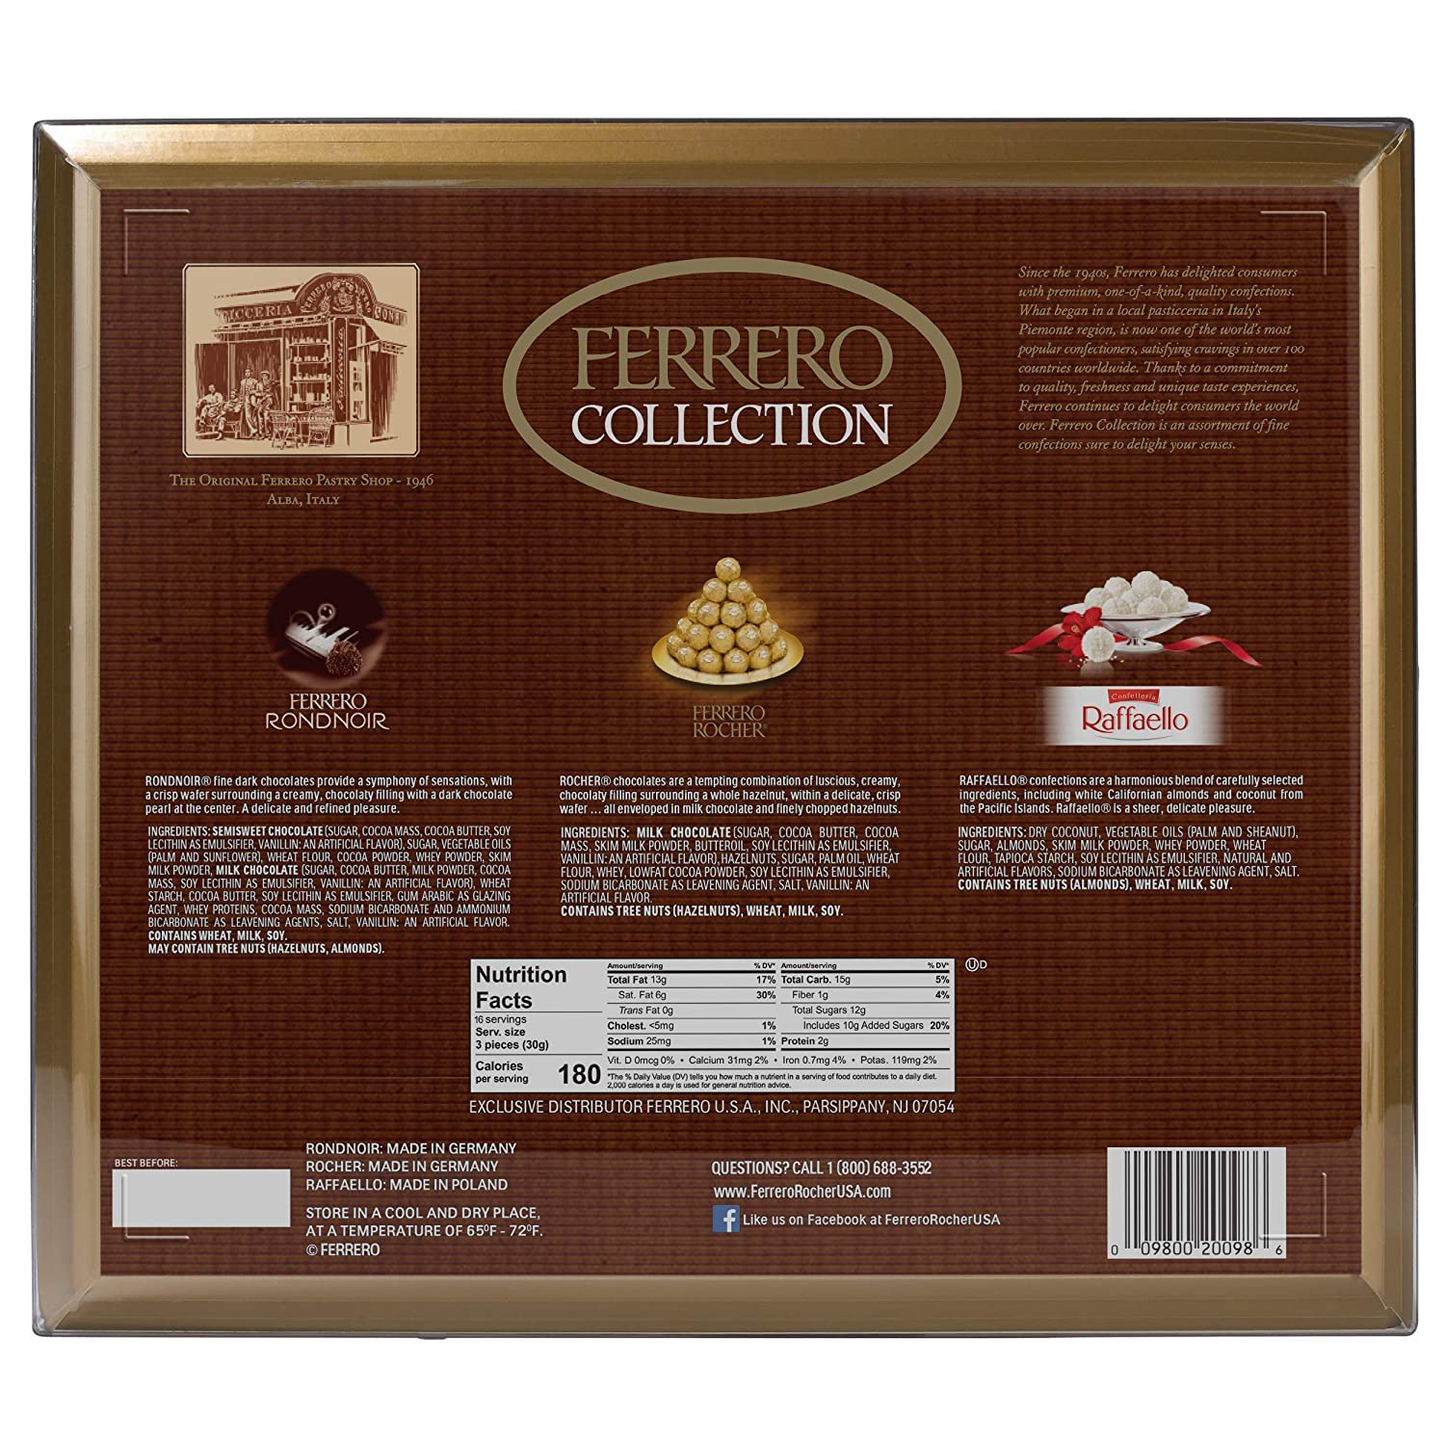 Ferrero Rocher Collection, Fine Hazelnut Milk Chocolates, 48 Count, Gift Box, Assorted Coconut Candy and Chocolates, Great for Holiday Entertaining, 18.2 Oz